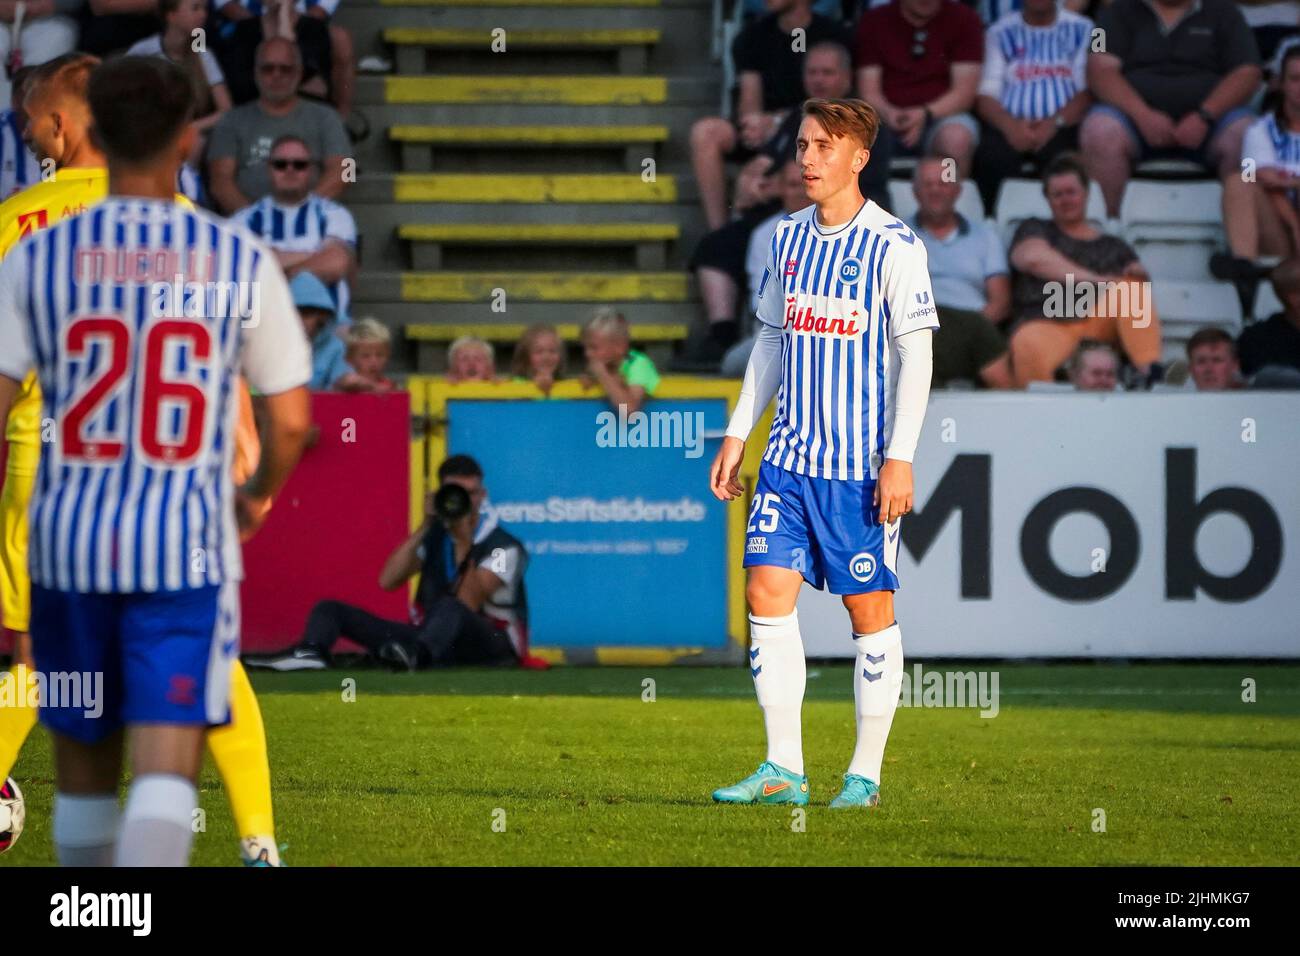 Odense, Denmark. 18th July, 2022. King (25) of OB seen during the 3F Superliga match between Odense Boldklub and FC Nordsjaelland at Nature Park in Odense. (Photo Gonzales Photo/Alamy